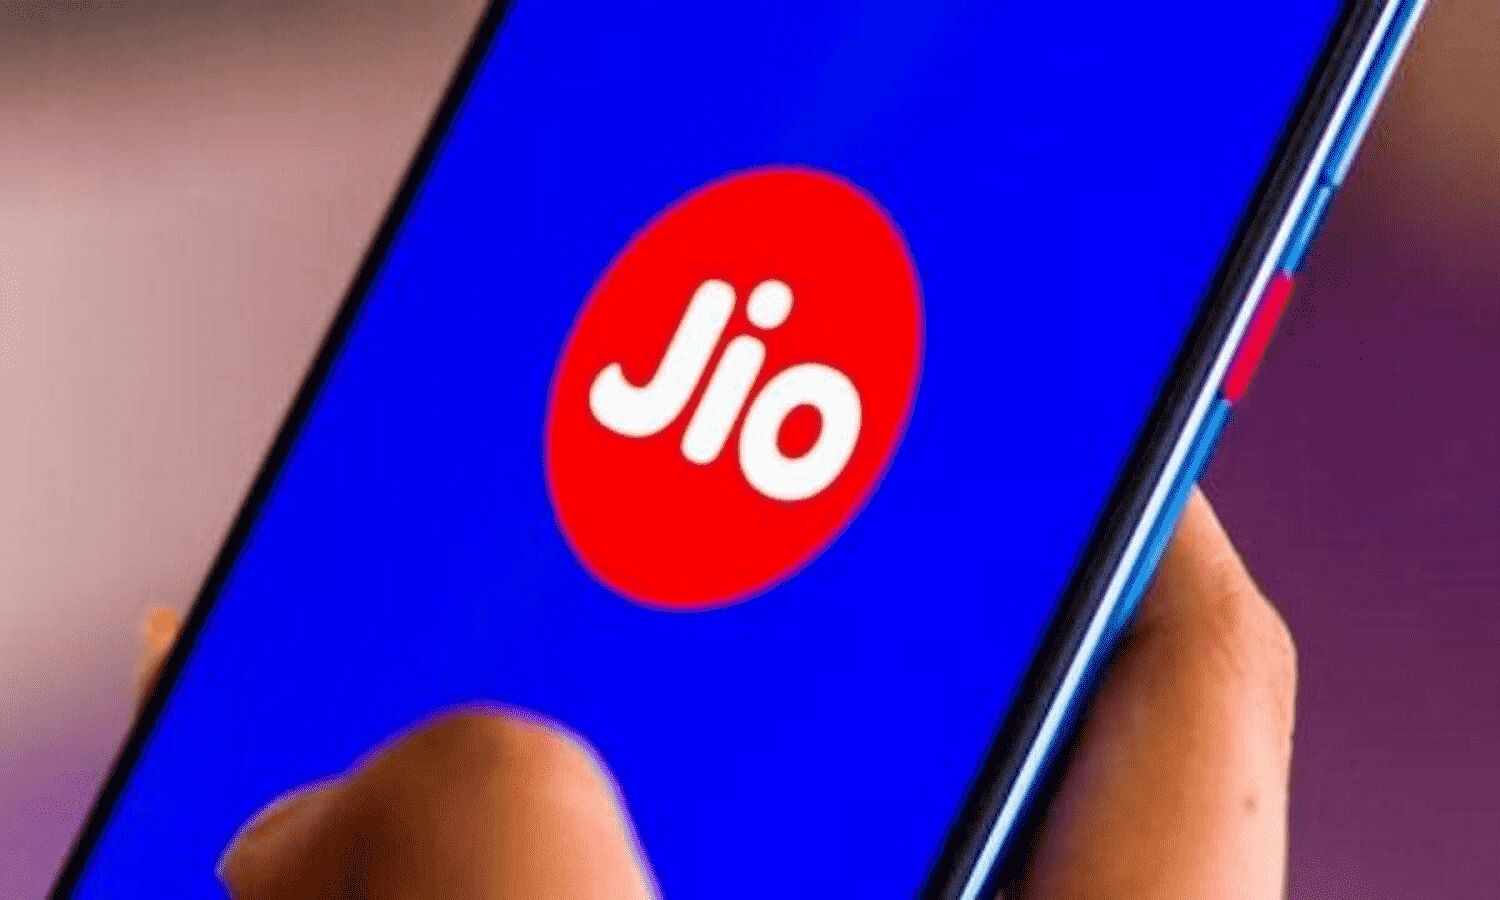 Reliance Jio New Plan: Reliance Jio’s Dhansu Prepaid new plan launched, 50GB data cost less than Rs 222